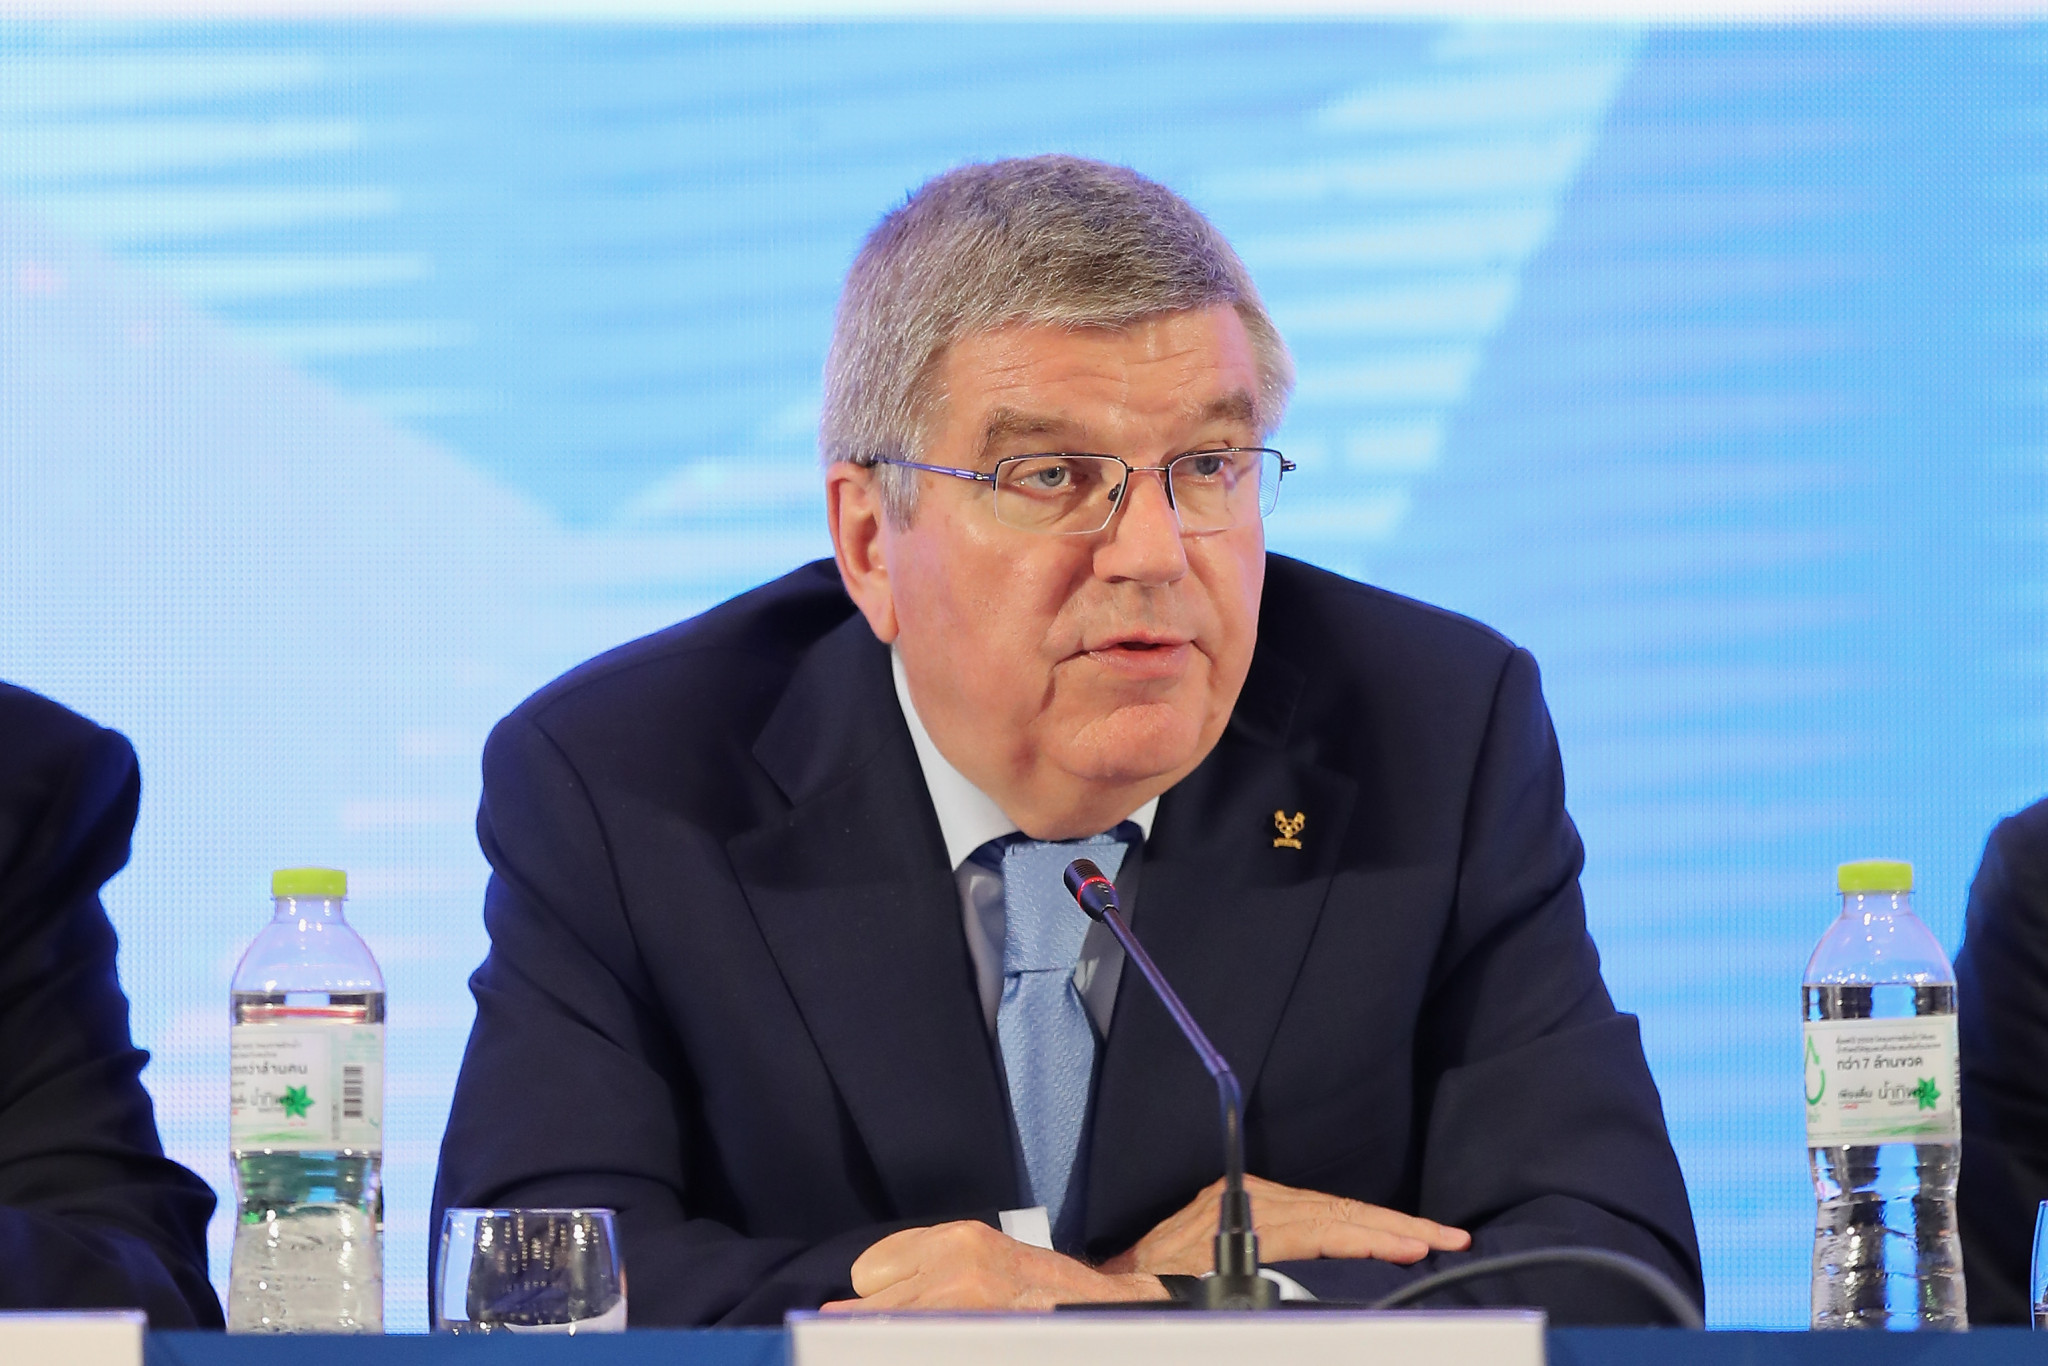 IOC President Thomas Bach is expected to attend the Closing Ceremony of the 2018 Asian Games ©Getty Images